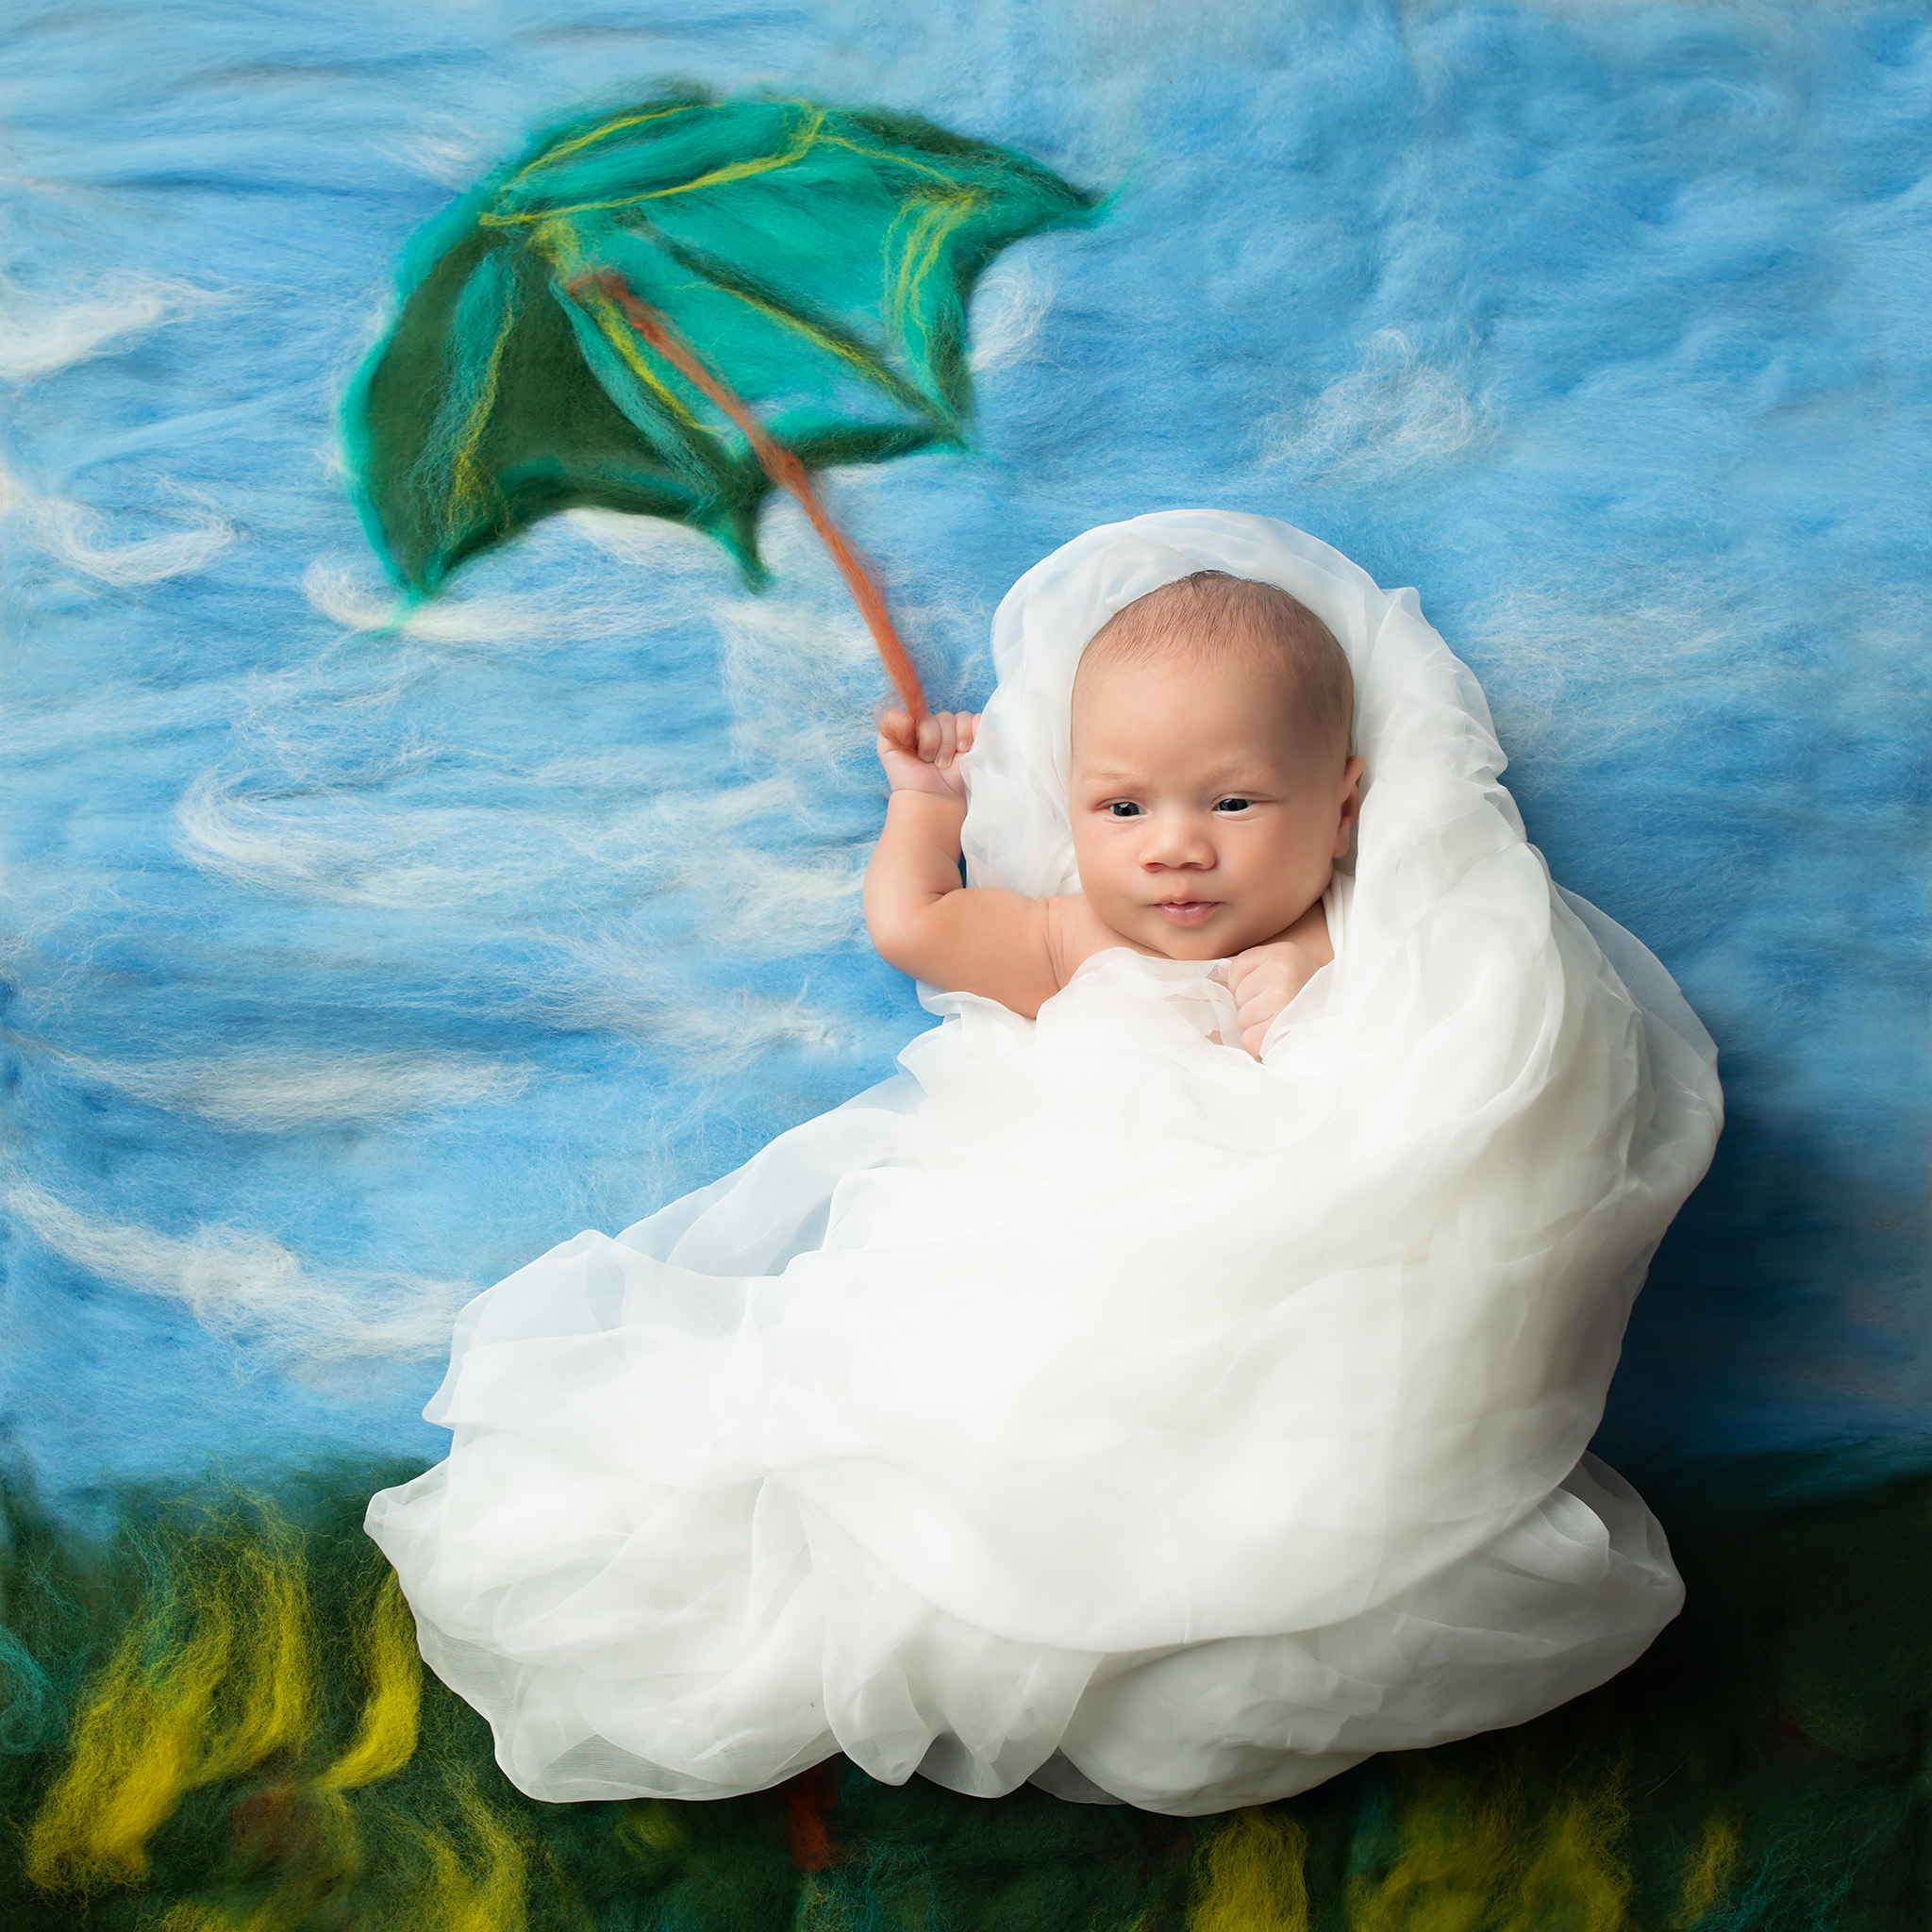 lady with a parasol inspired newborn picture